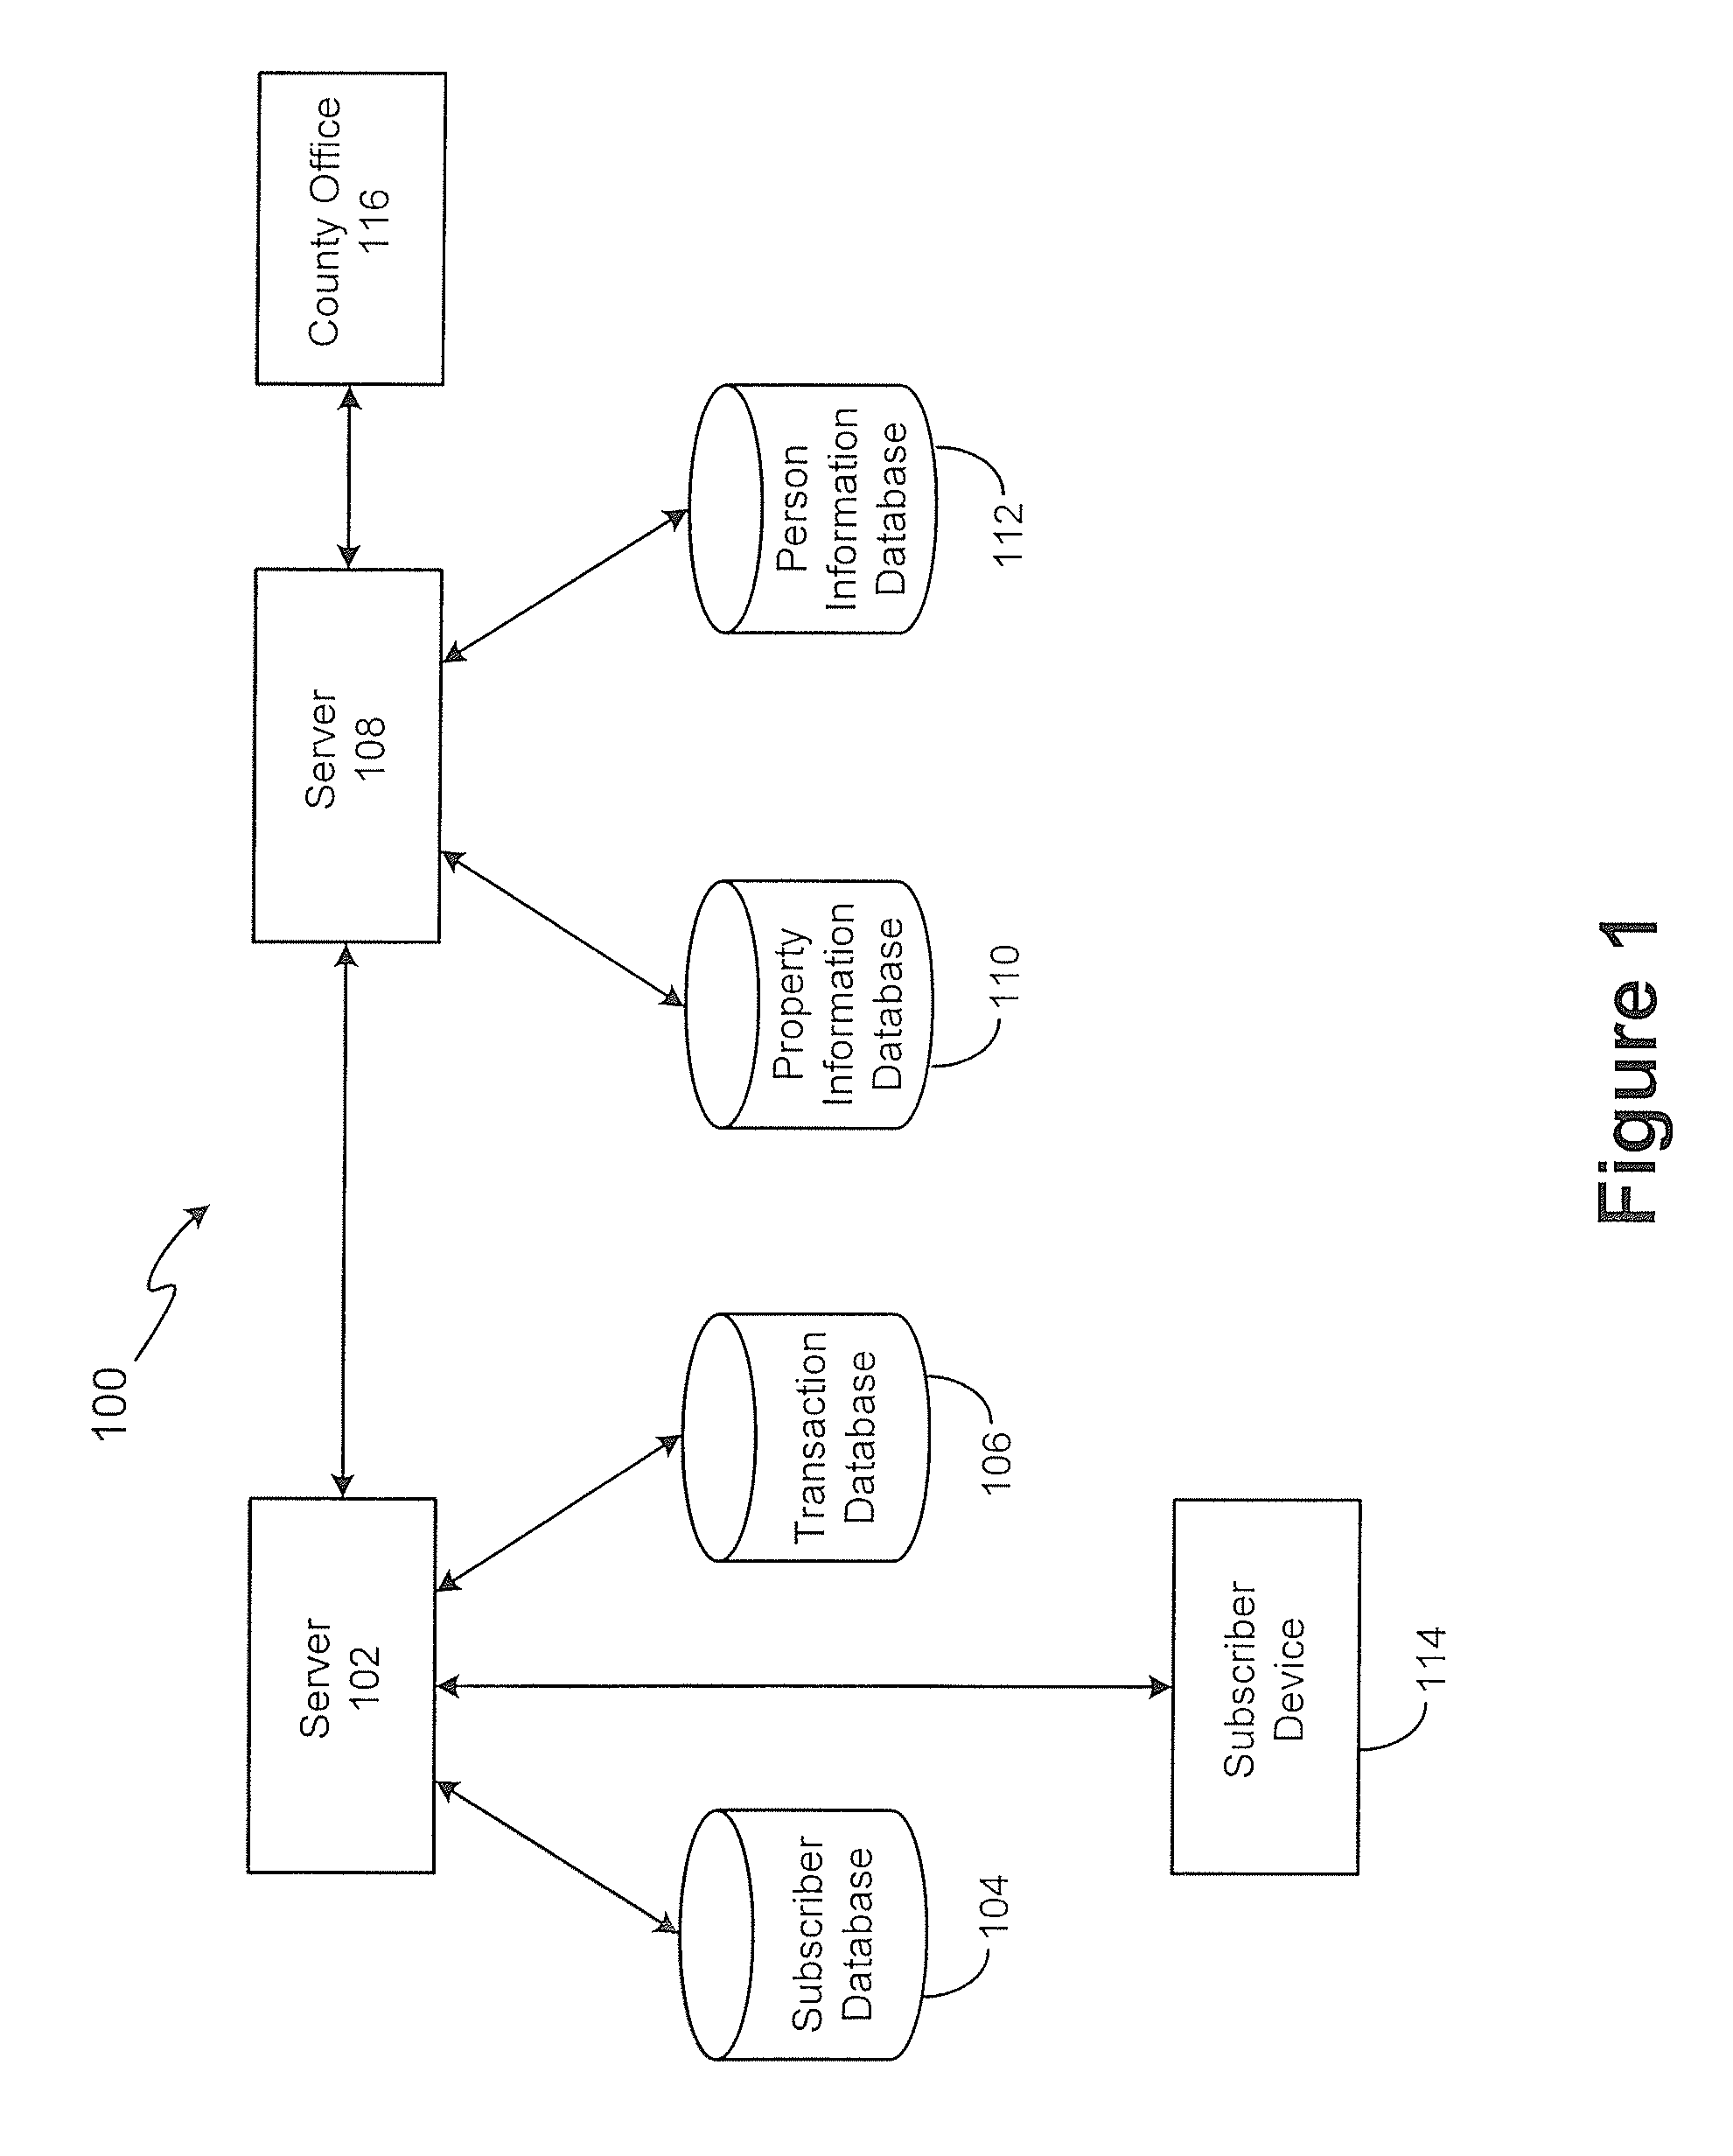 System and method for monitoring events associated with a person or property